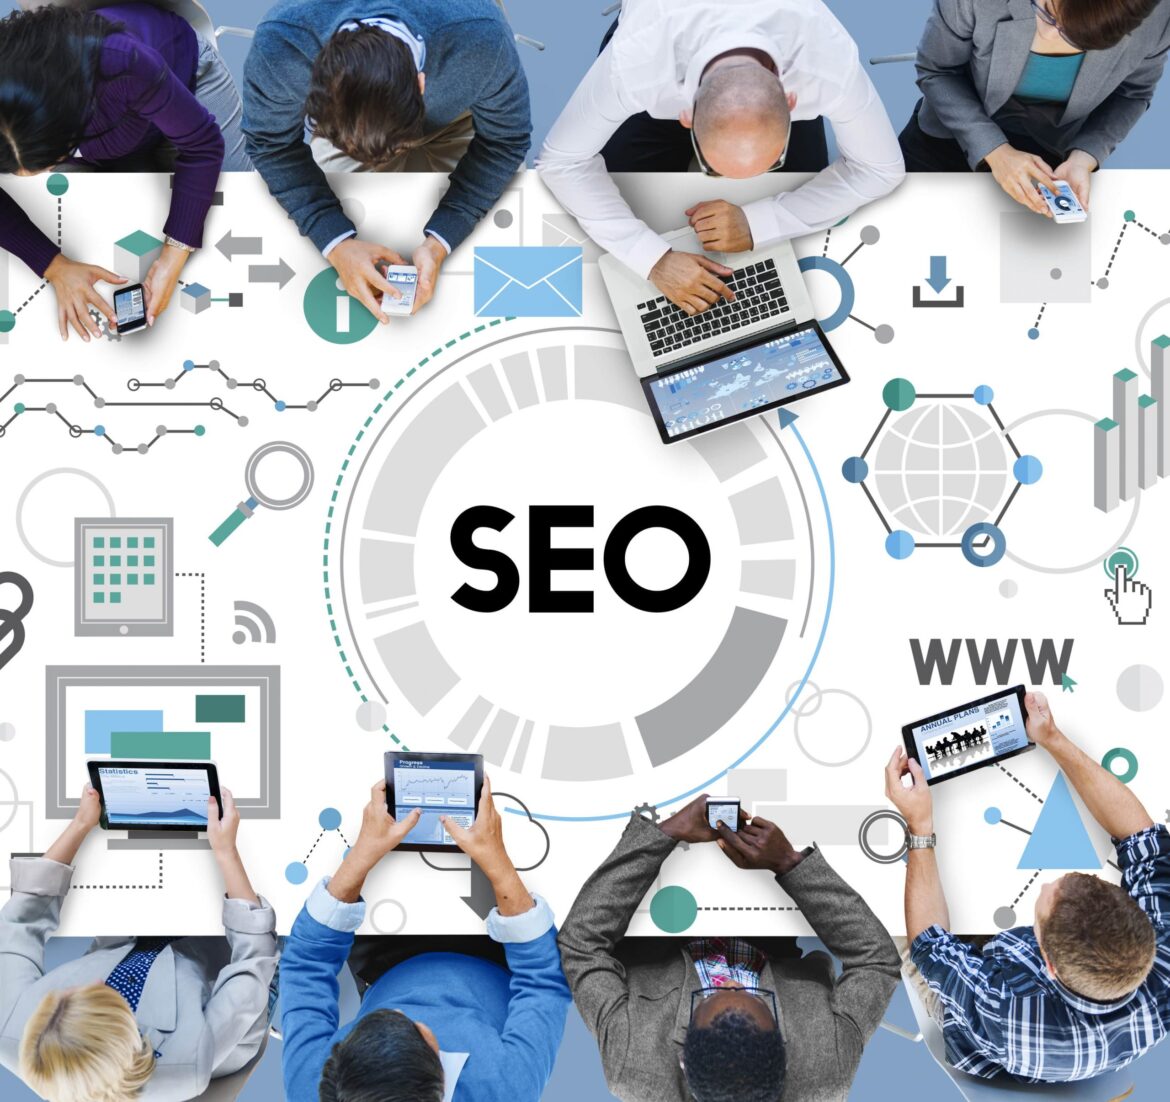 How to choose the best SEO strategy for your website?